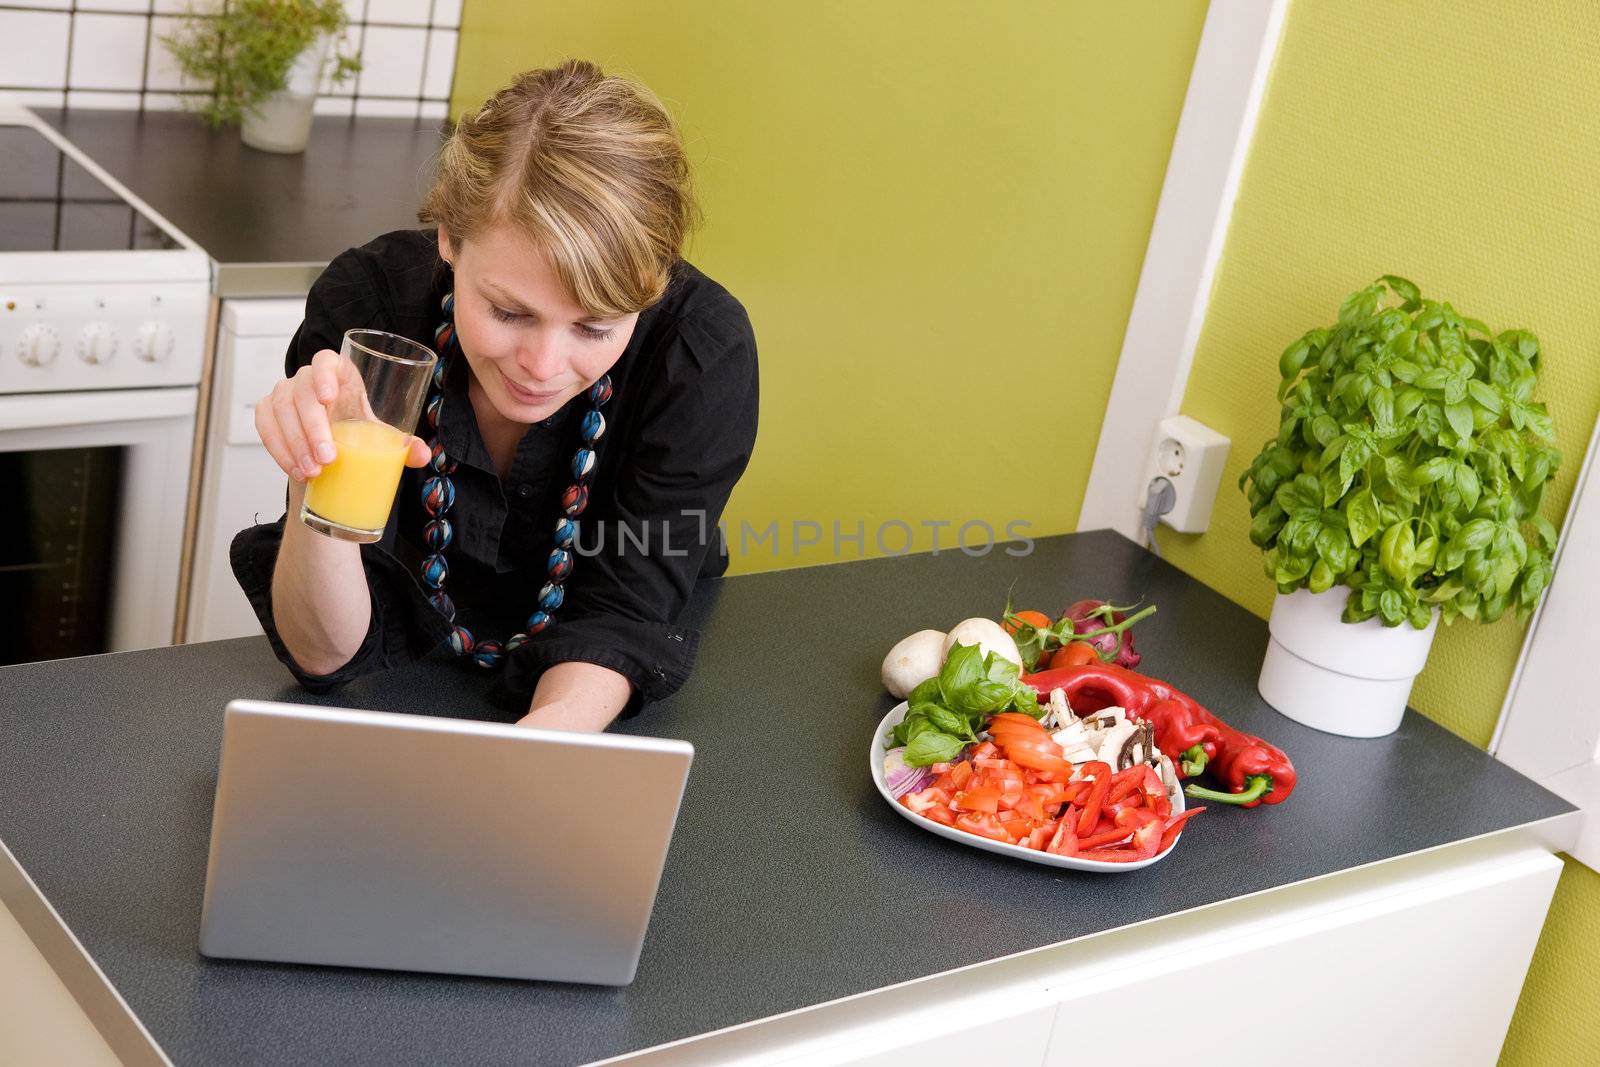 A young female surfs the internet while enjoying a light healthy snack of vegetables and juice.